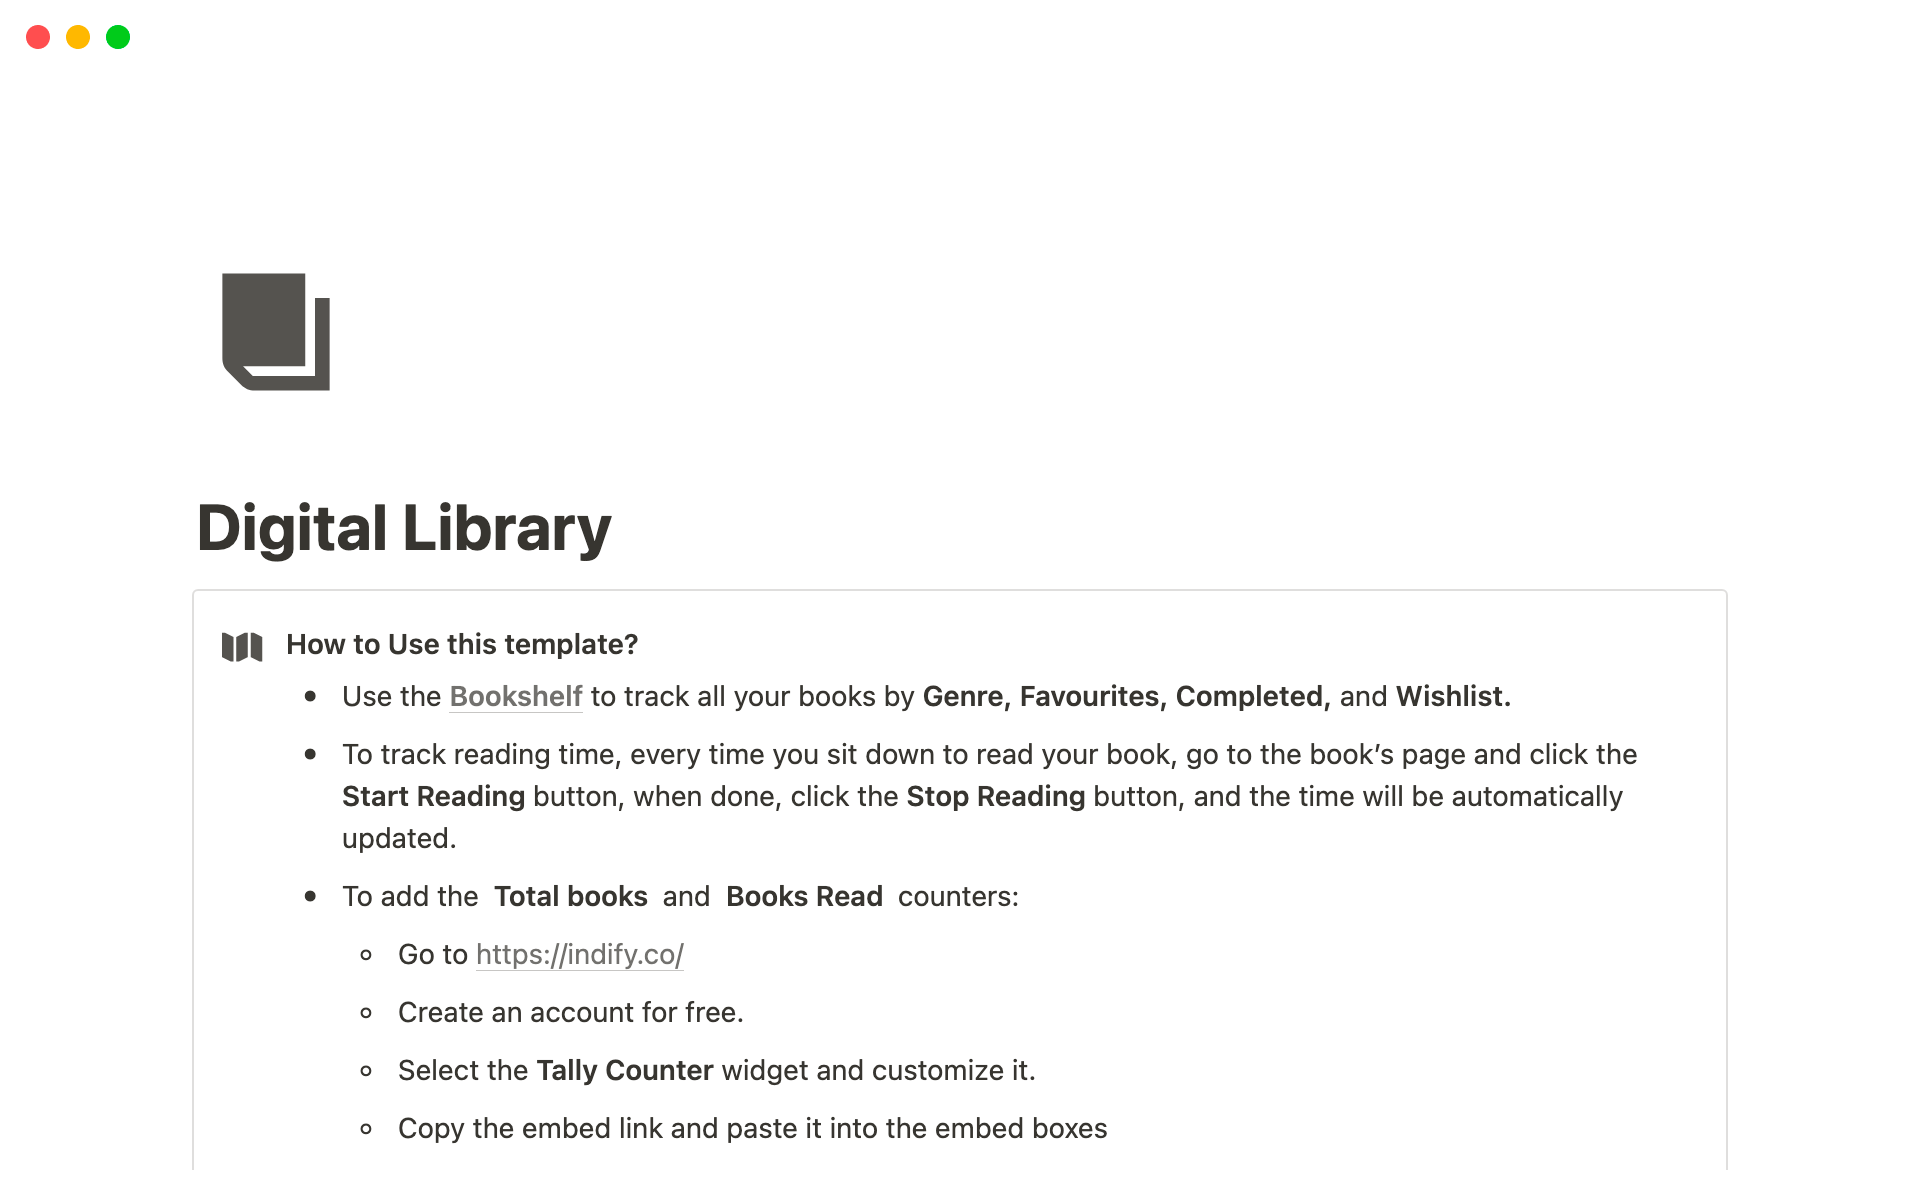 A digital library to keep track of all your books, notes and reading time.